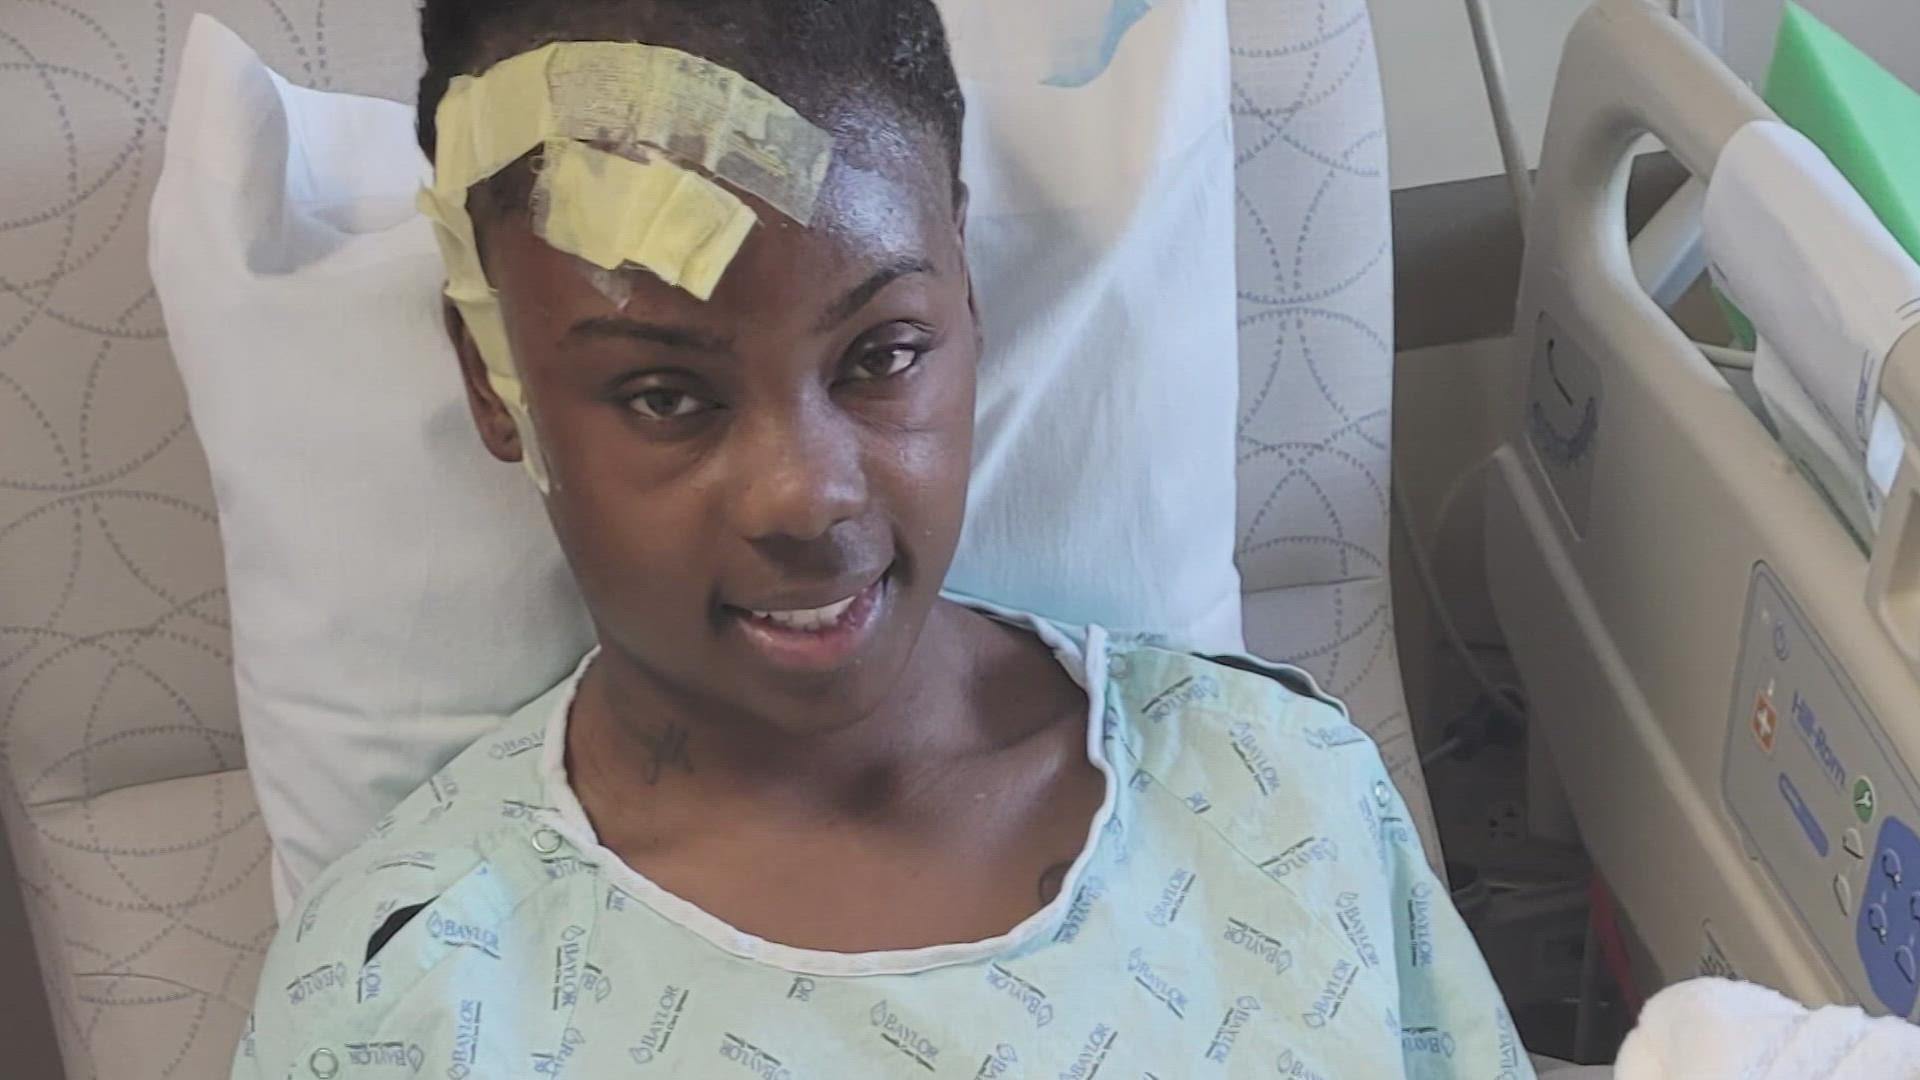 Jazmin Anderson’s mother told WFAA she was near the stage when she was shot.